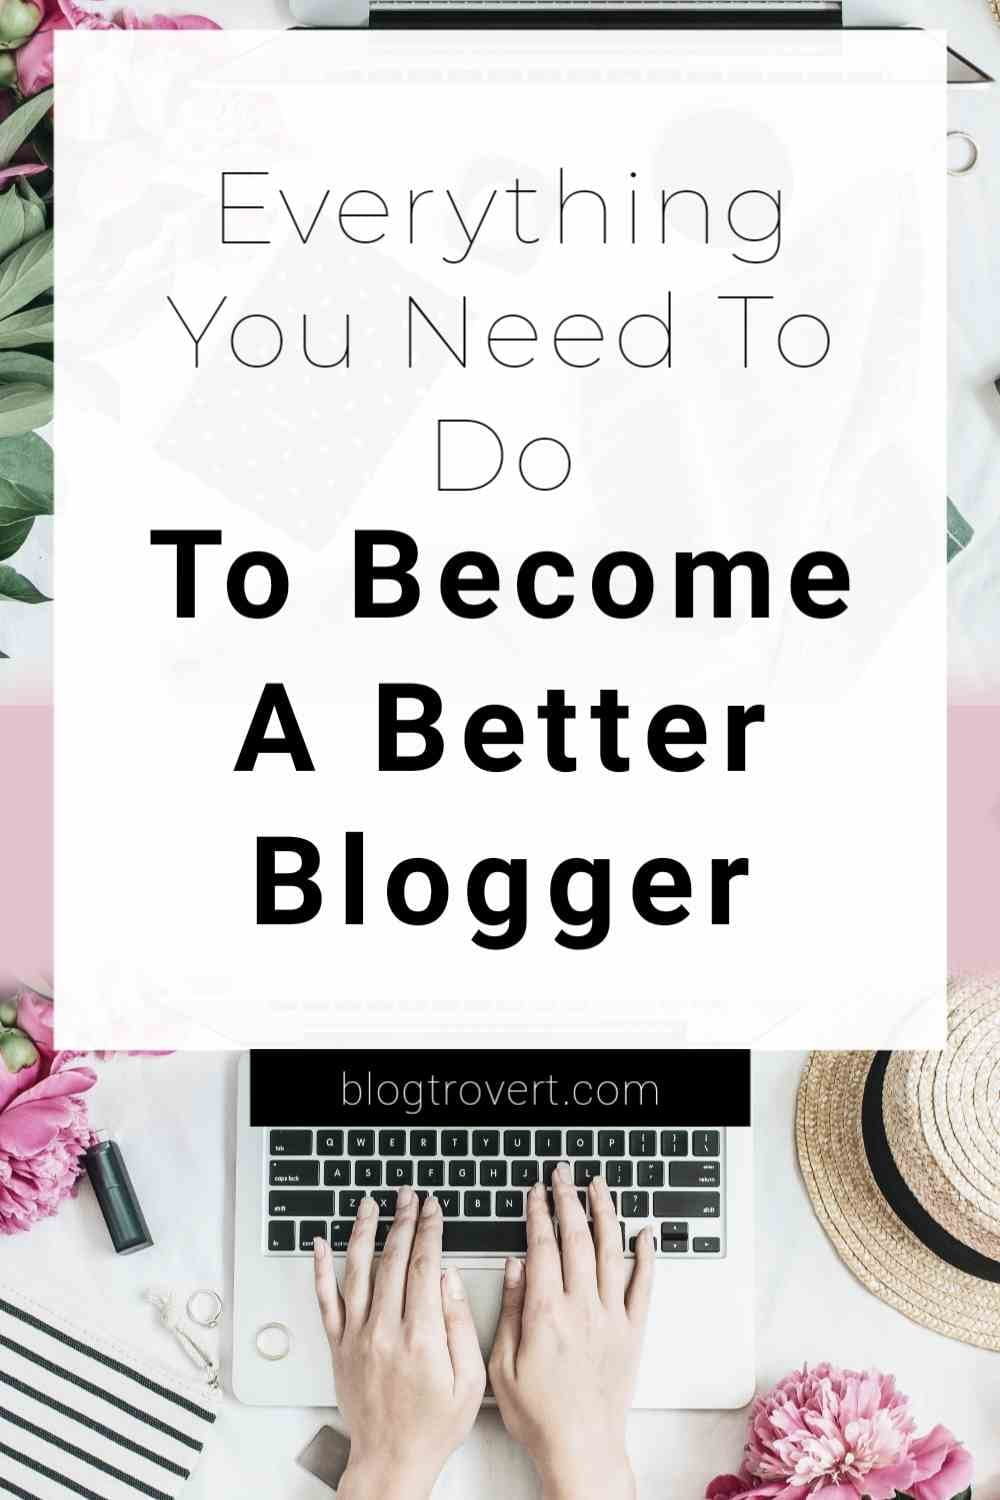 How To Become a Better Blogger - 13 helpful guides for Amateur bloggers 5